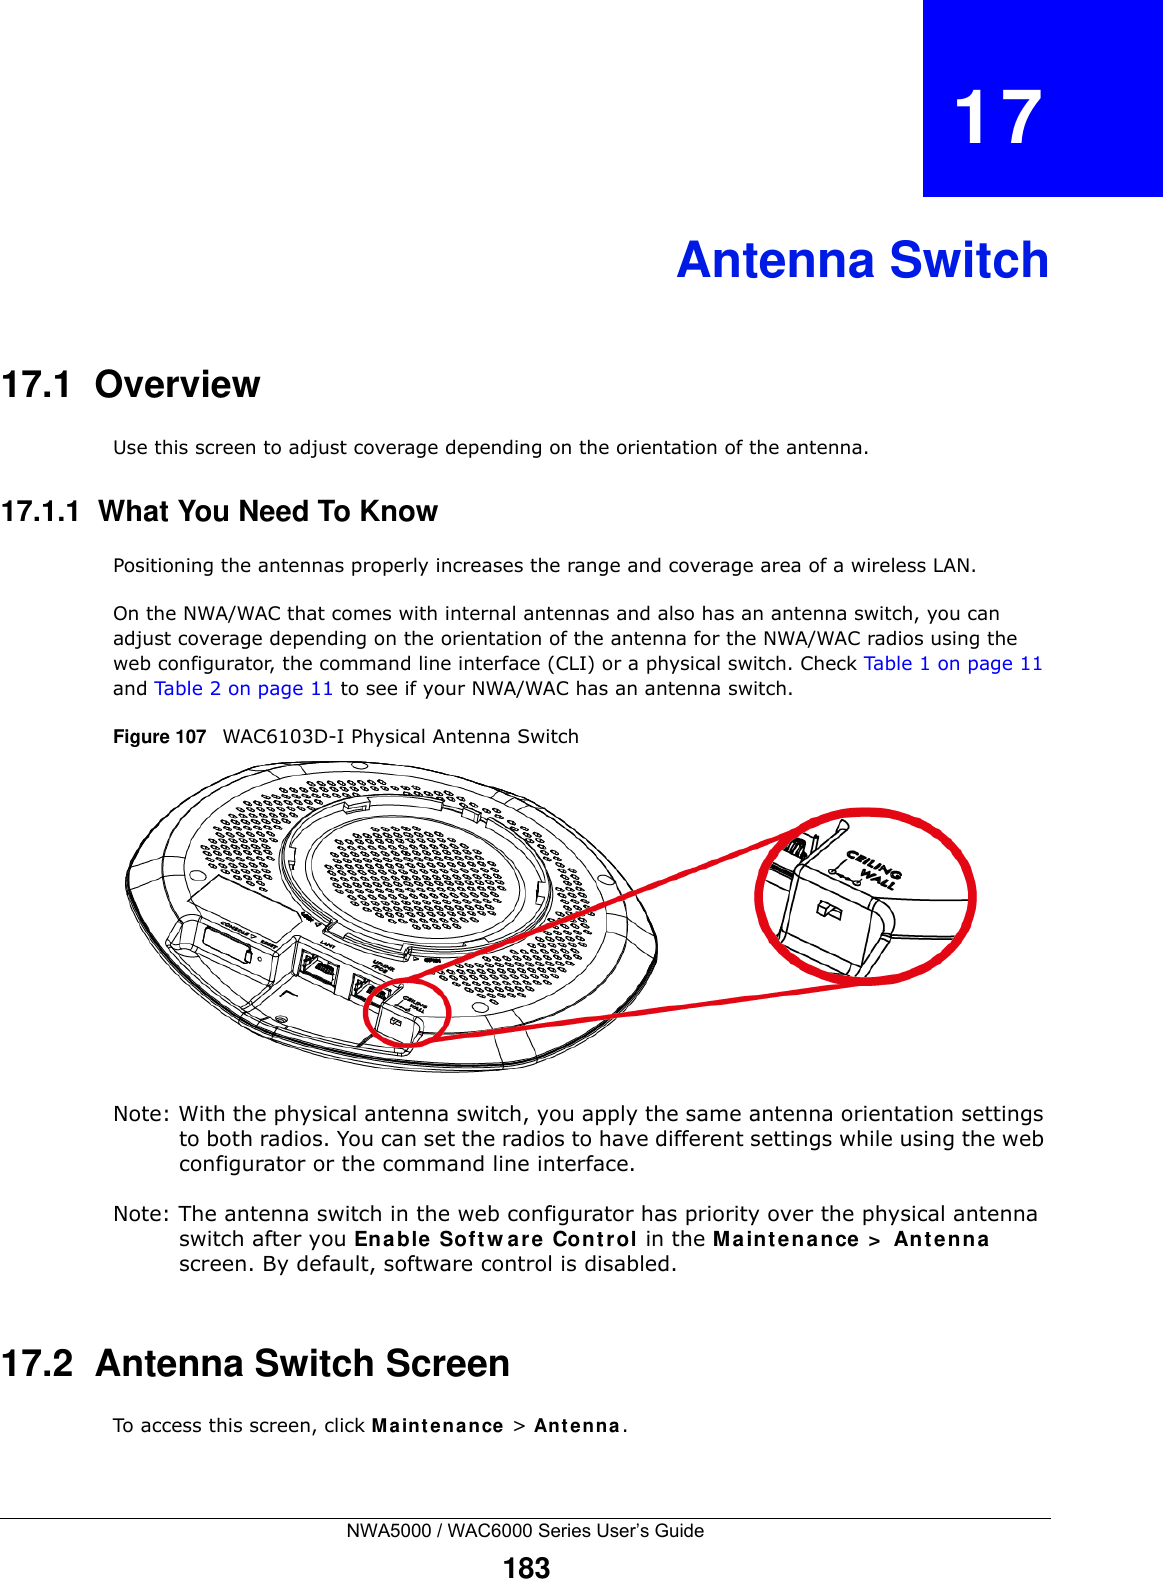 NWA5000 / WAC6000 Series User’s Guide183CHAPTER   17Antenna Switch17.1  OverviewUse this screen to adjust coverage depending on the orientation of the antenna.17.1.1  What You Need To KnowPositioning the antennas properly increases the range and coverage area of a wireless LAN.On the NWA/WAC that comes with internal antennas and also has an antenna switch, you can adjust coverage depending on the orientation of the antenna for the NWA/WAC radios using the web configurator, the command line interface (CLI) or a physical switch. Check Table 1 on page 11 and Table 2 on page 11 to see if your NWA/WAC has an antenna switch.Figure 107   WAC6103D-I Physical Antenna Switch Note: With the physical antenna switch, you apply the same antenna orientation settings to both radios. You can set the radios to have different settings while using the web configurator or the command line interface.Note: The antenna switch in the web configurator has priority over the physical antenna switch after you Enable Software Control in the Maintenance &gt; Antenna screen. By default, software control is disabled.17.2  Antenna Switch ScreenTo access this screen, click Maintenance &gt; Antenna.